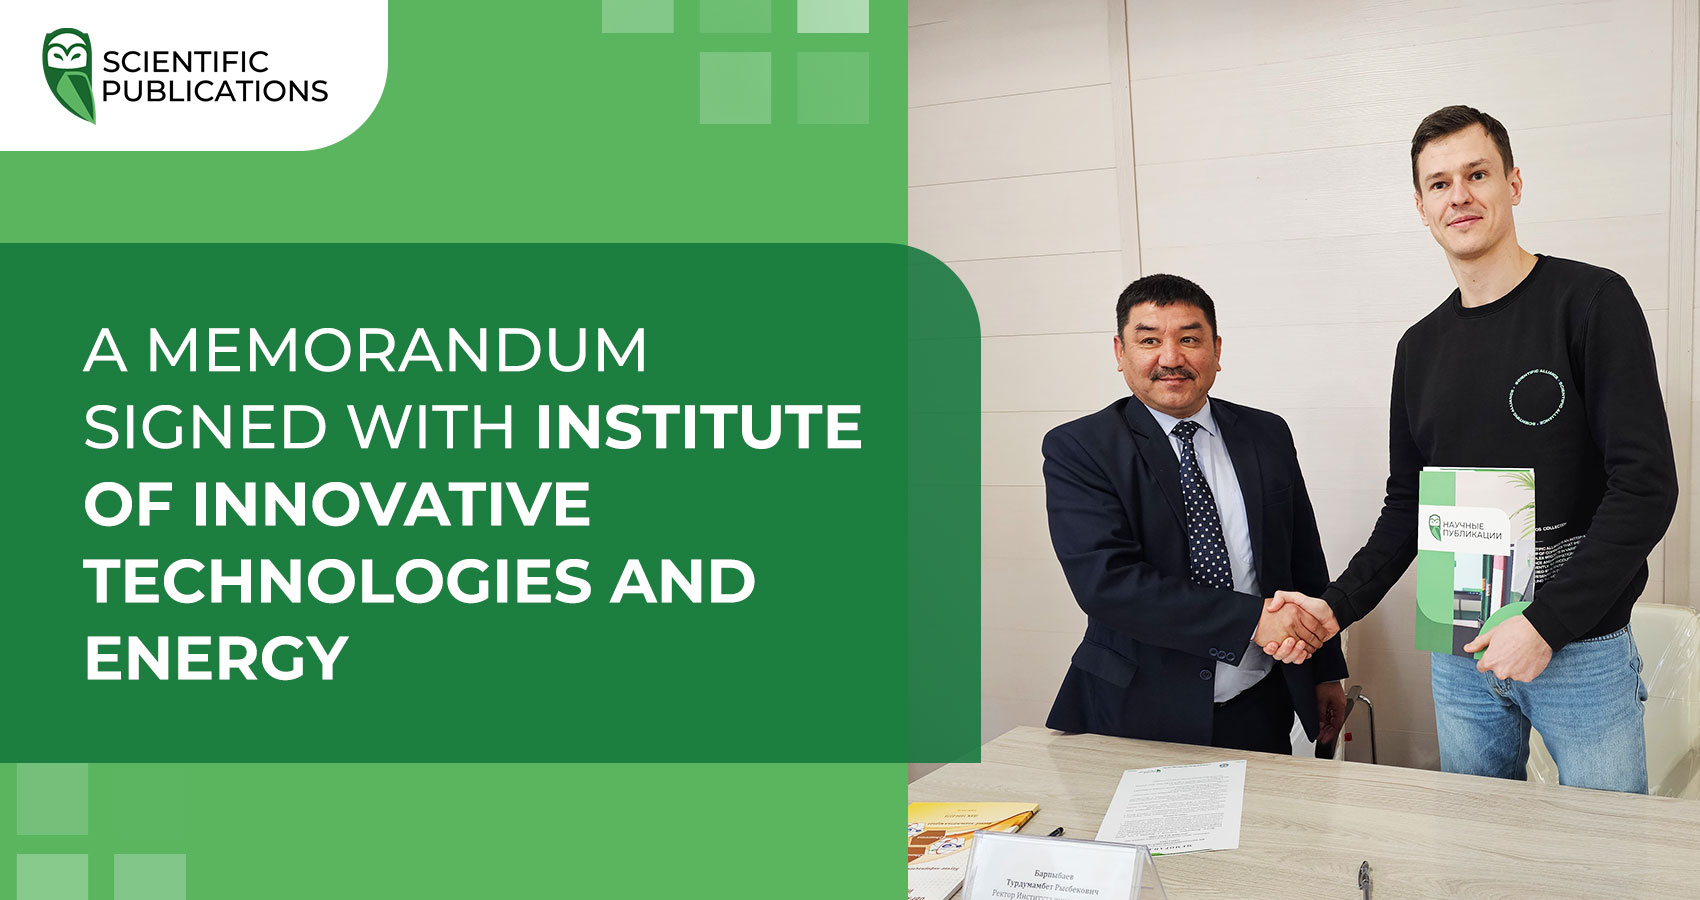 A memorandum has been signed with the Institute of Innovative Technologies and Energy